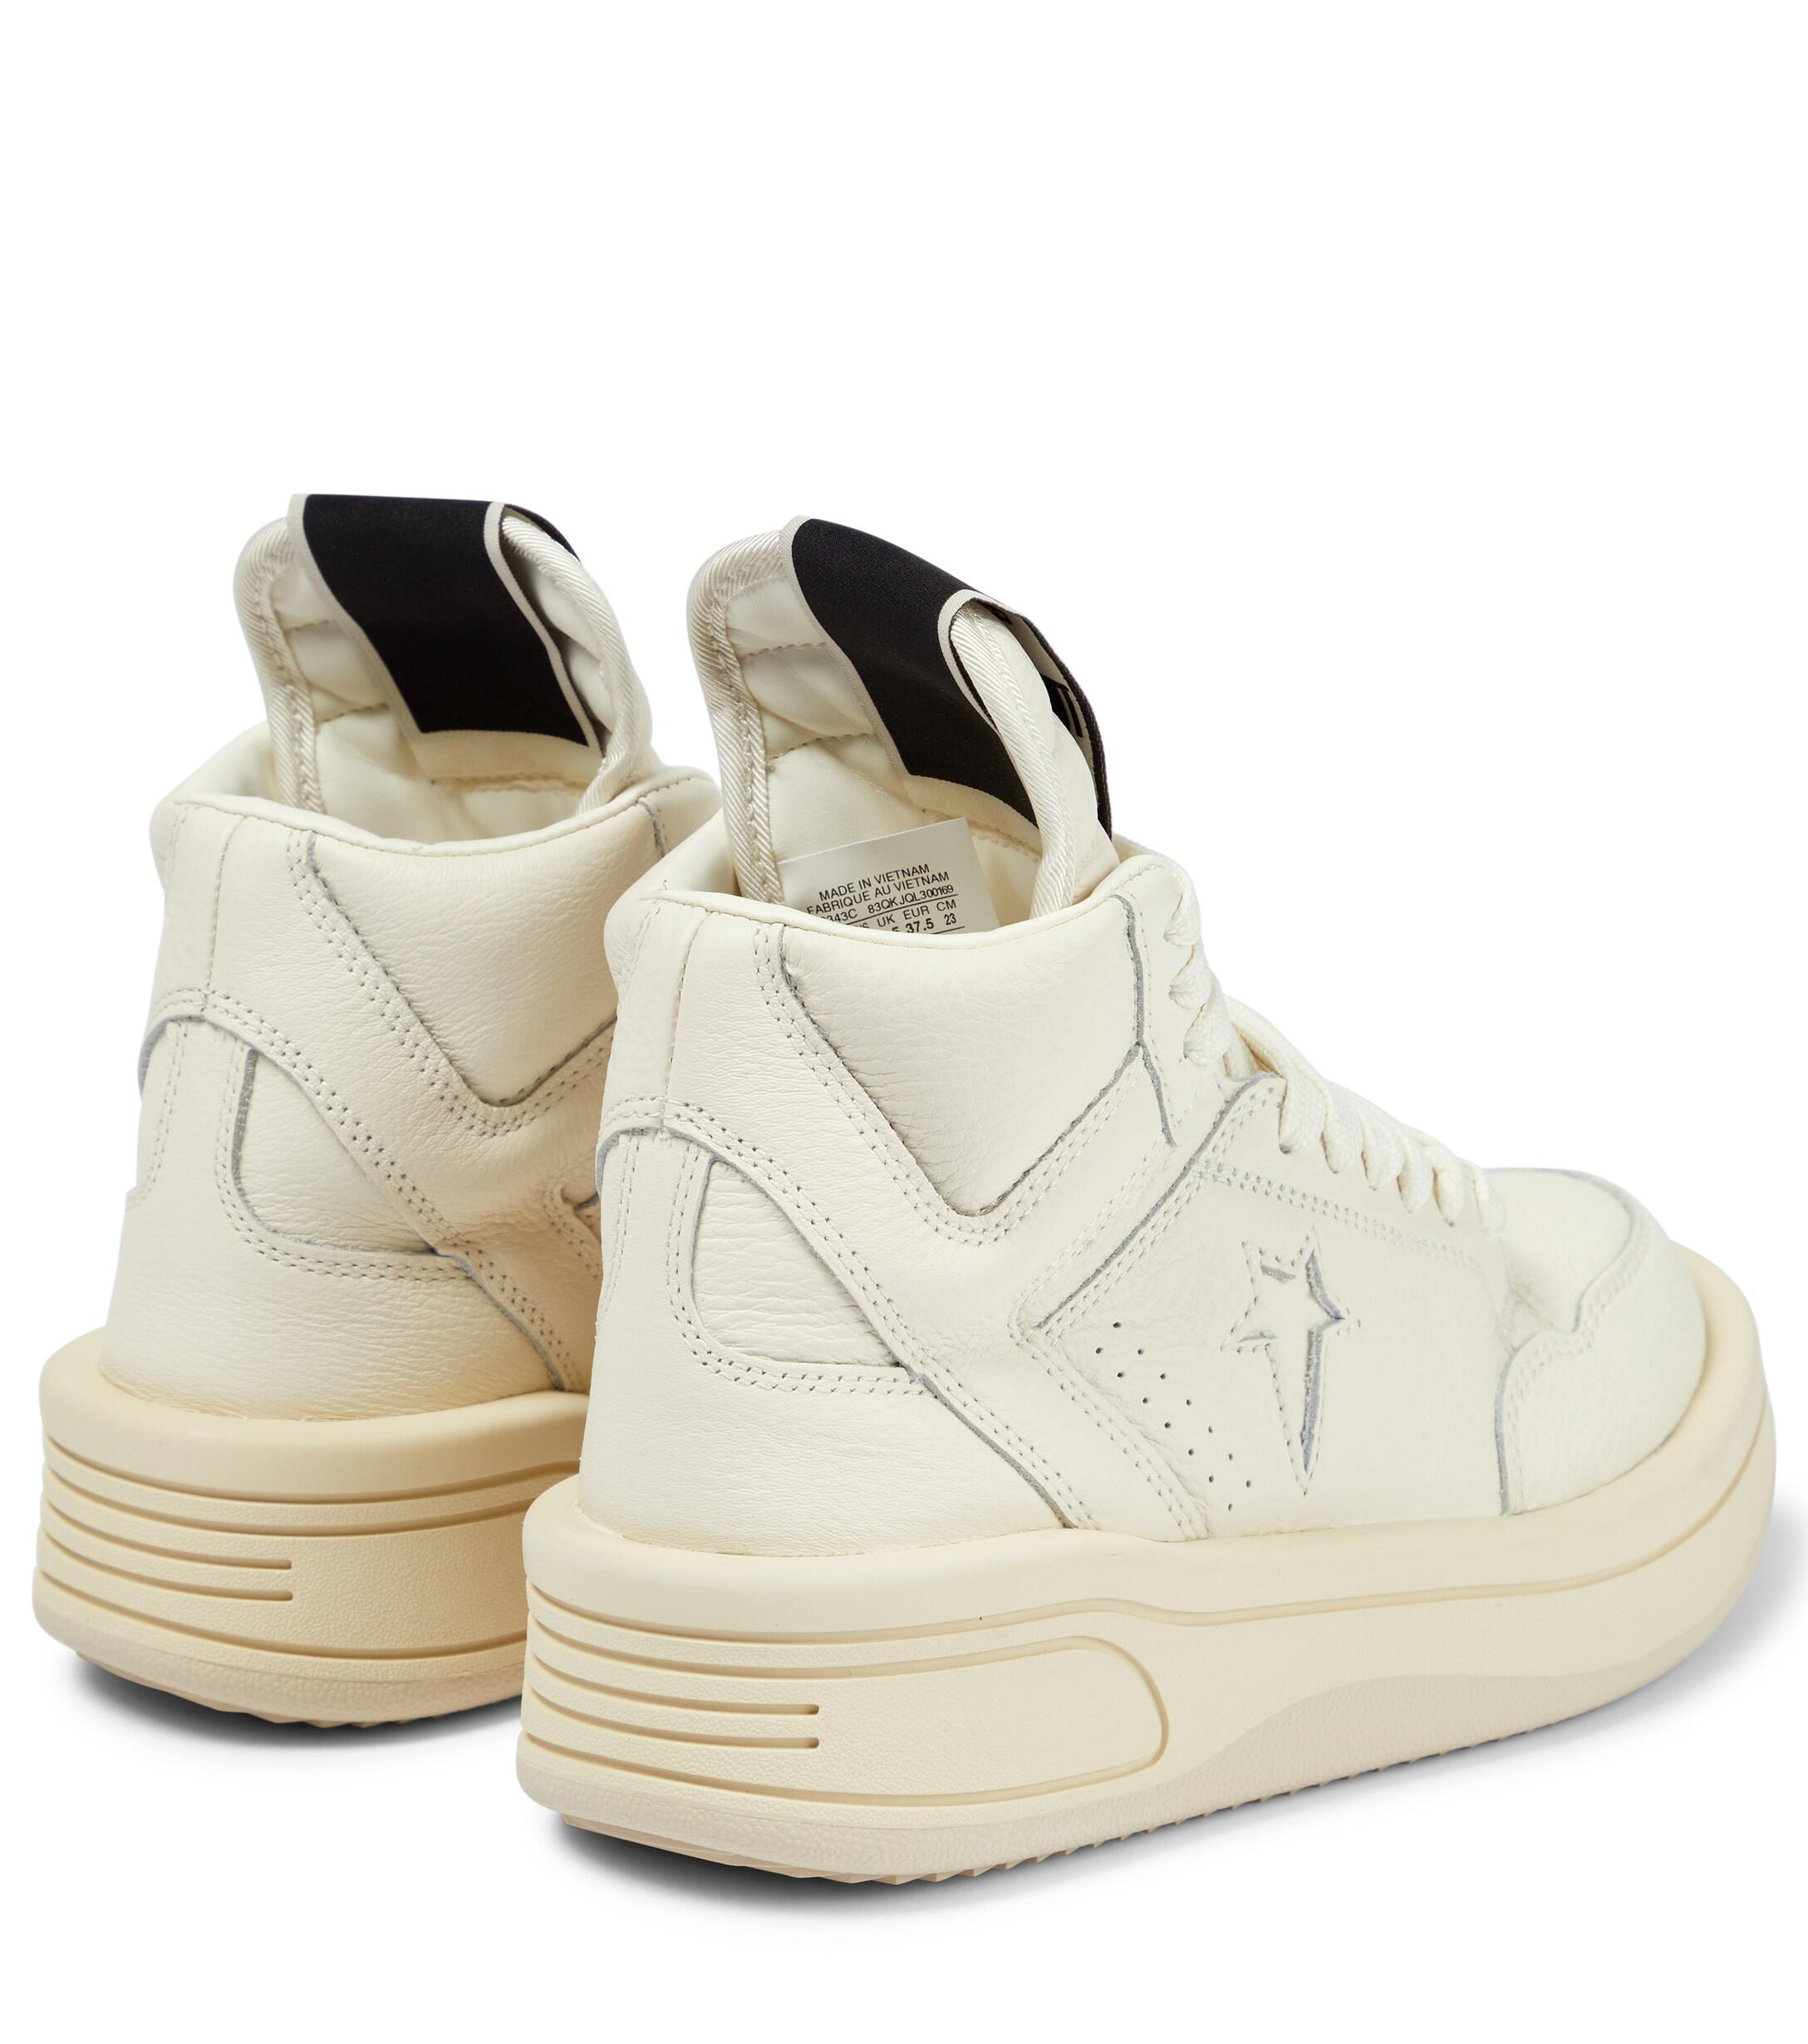 Rick Owens X Converse Drkshdw Turbowpn Leather High-top Sneakers in White |  Lyst